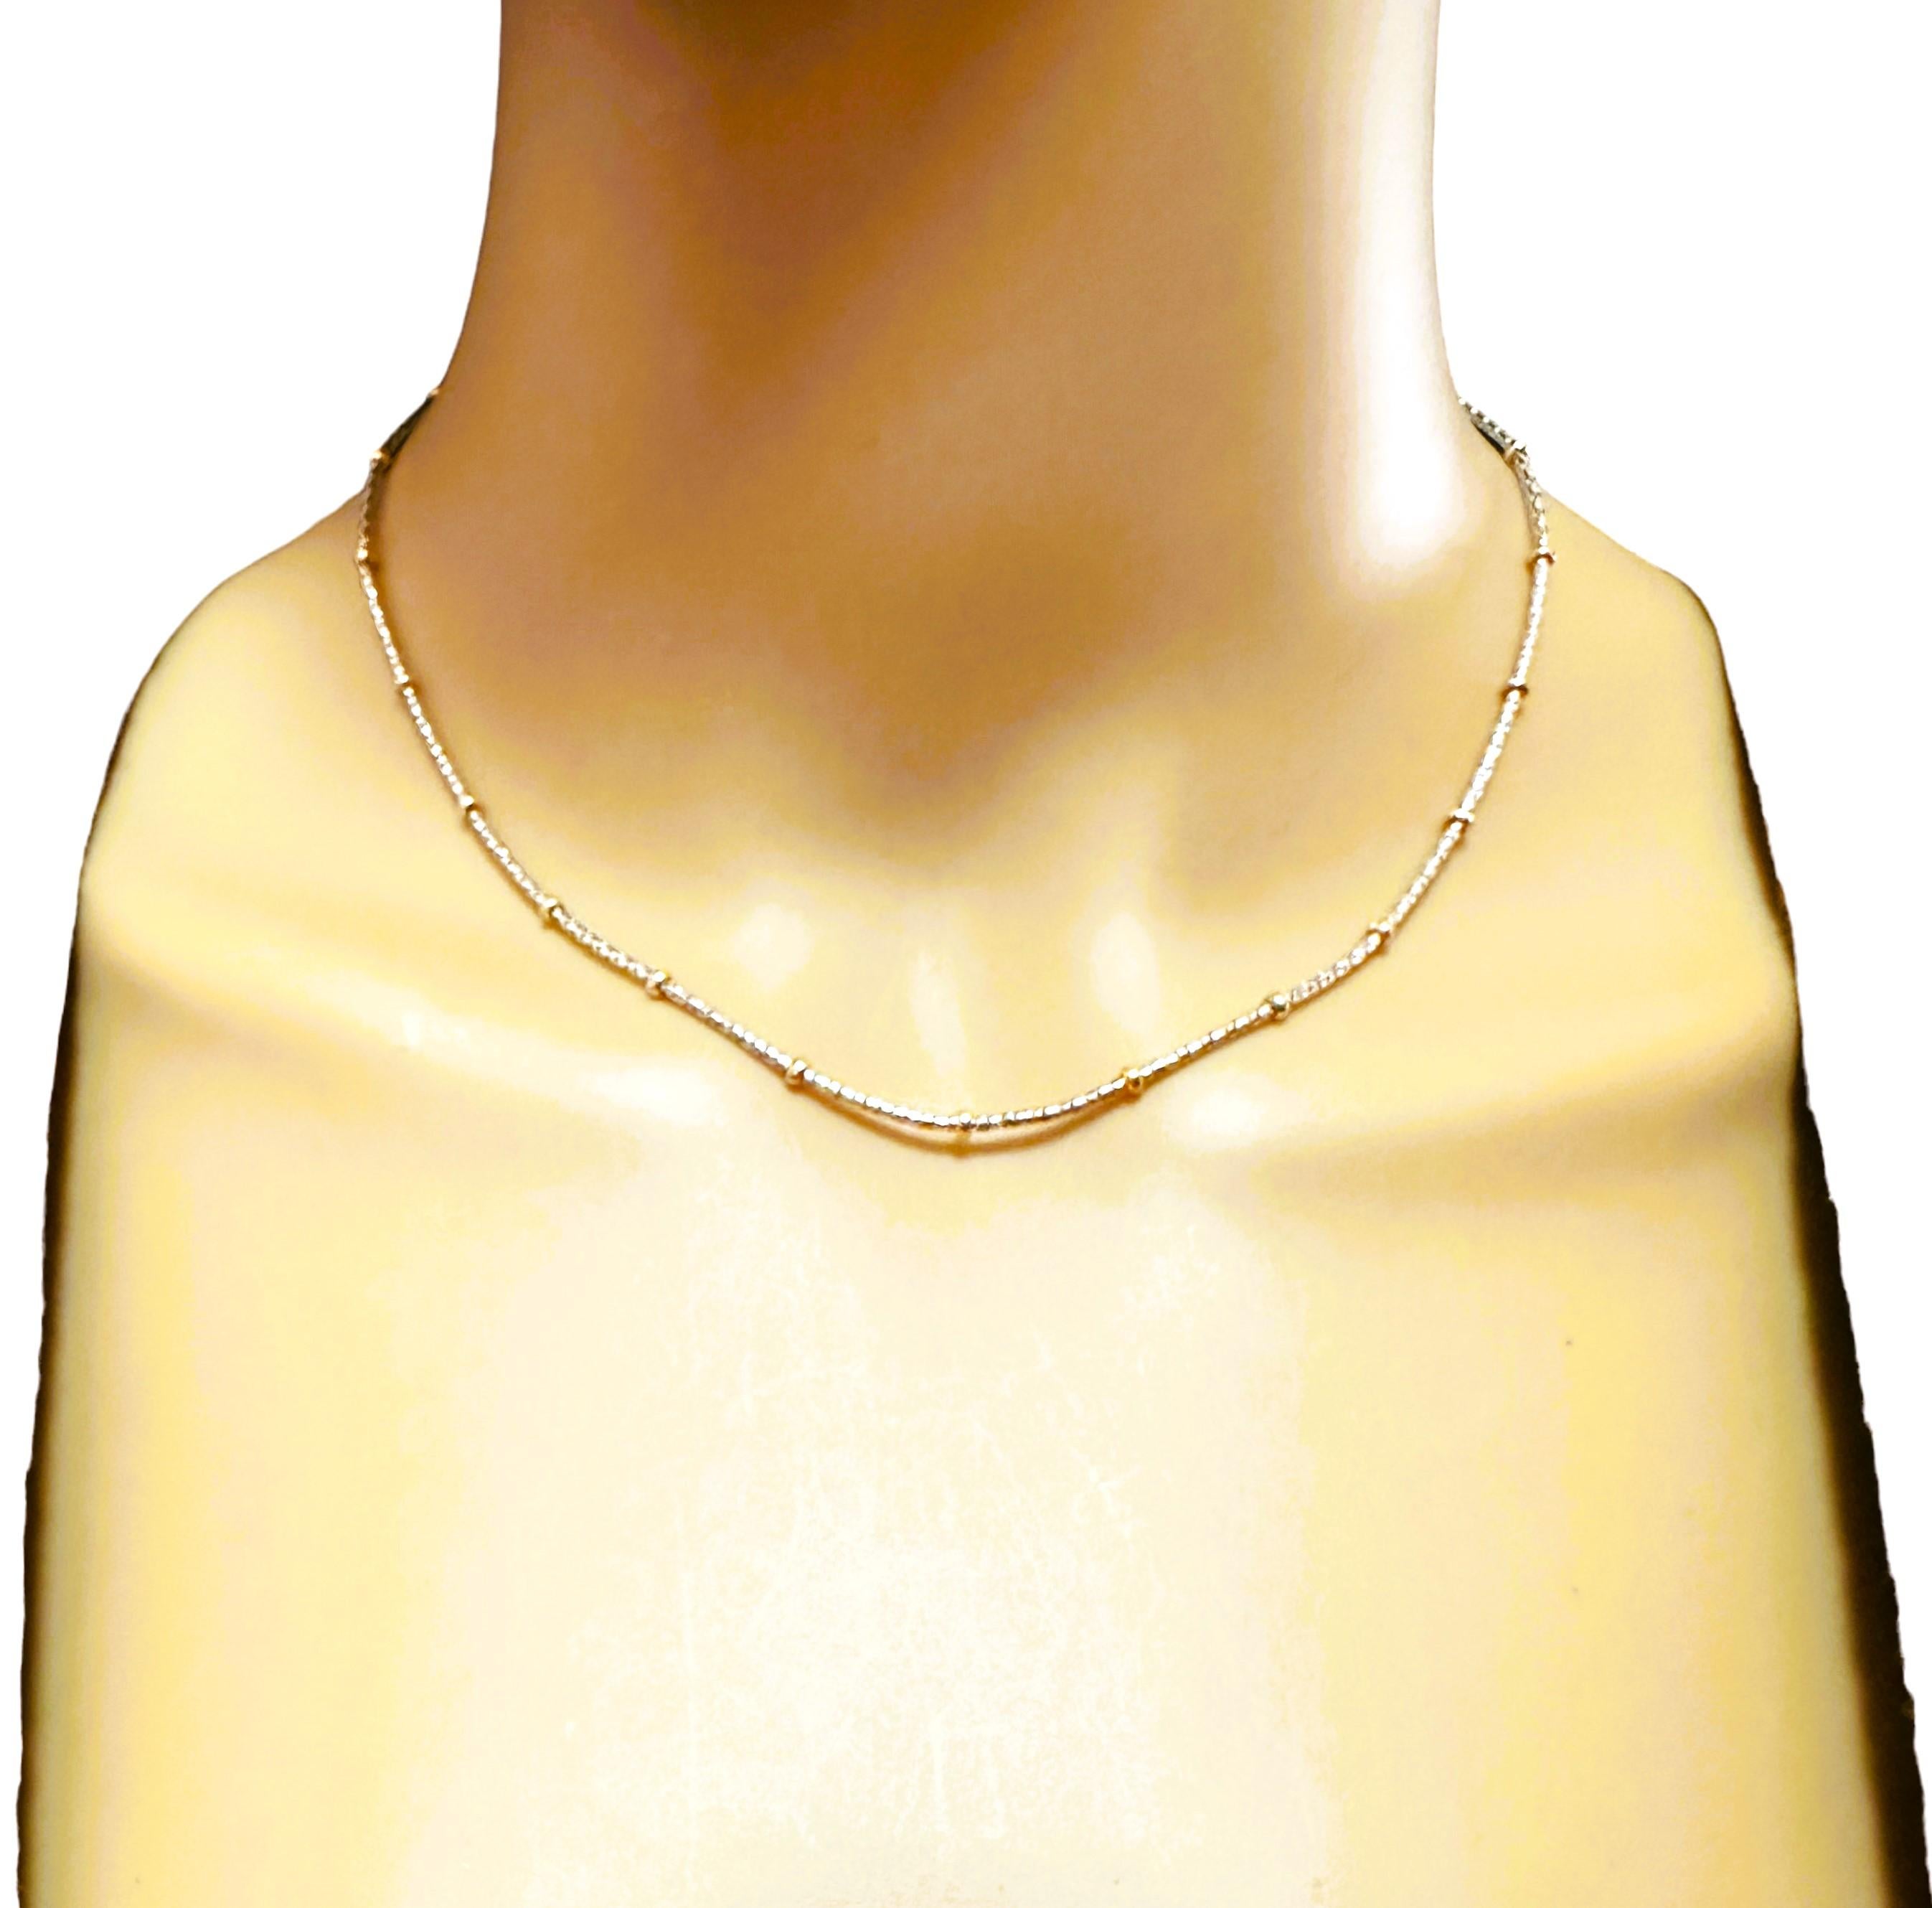 This necklace is just very well made.  It is such a quality made piece made by the Kitsinian Jewelers.  It is a 14K White Gold laser chain with stationed 14k Yellow Gold beads.  The two colors make it very versatile.  It is stamped 